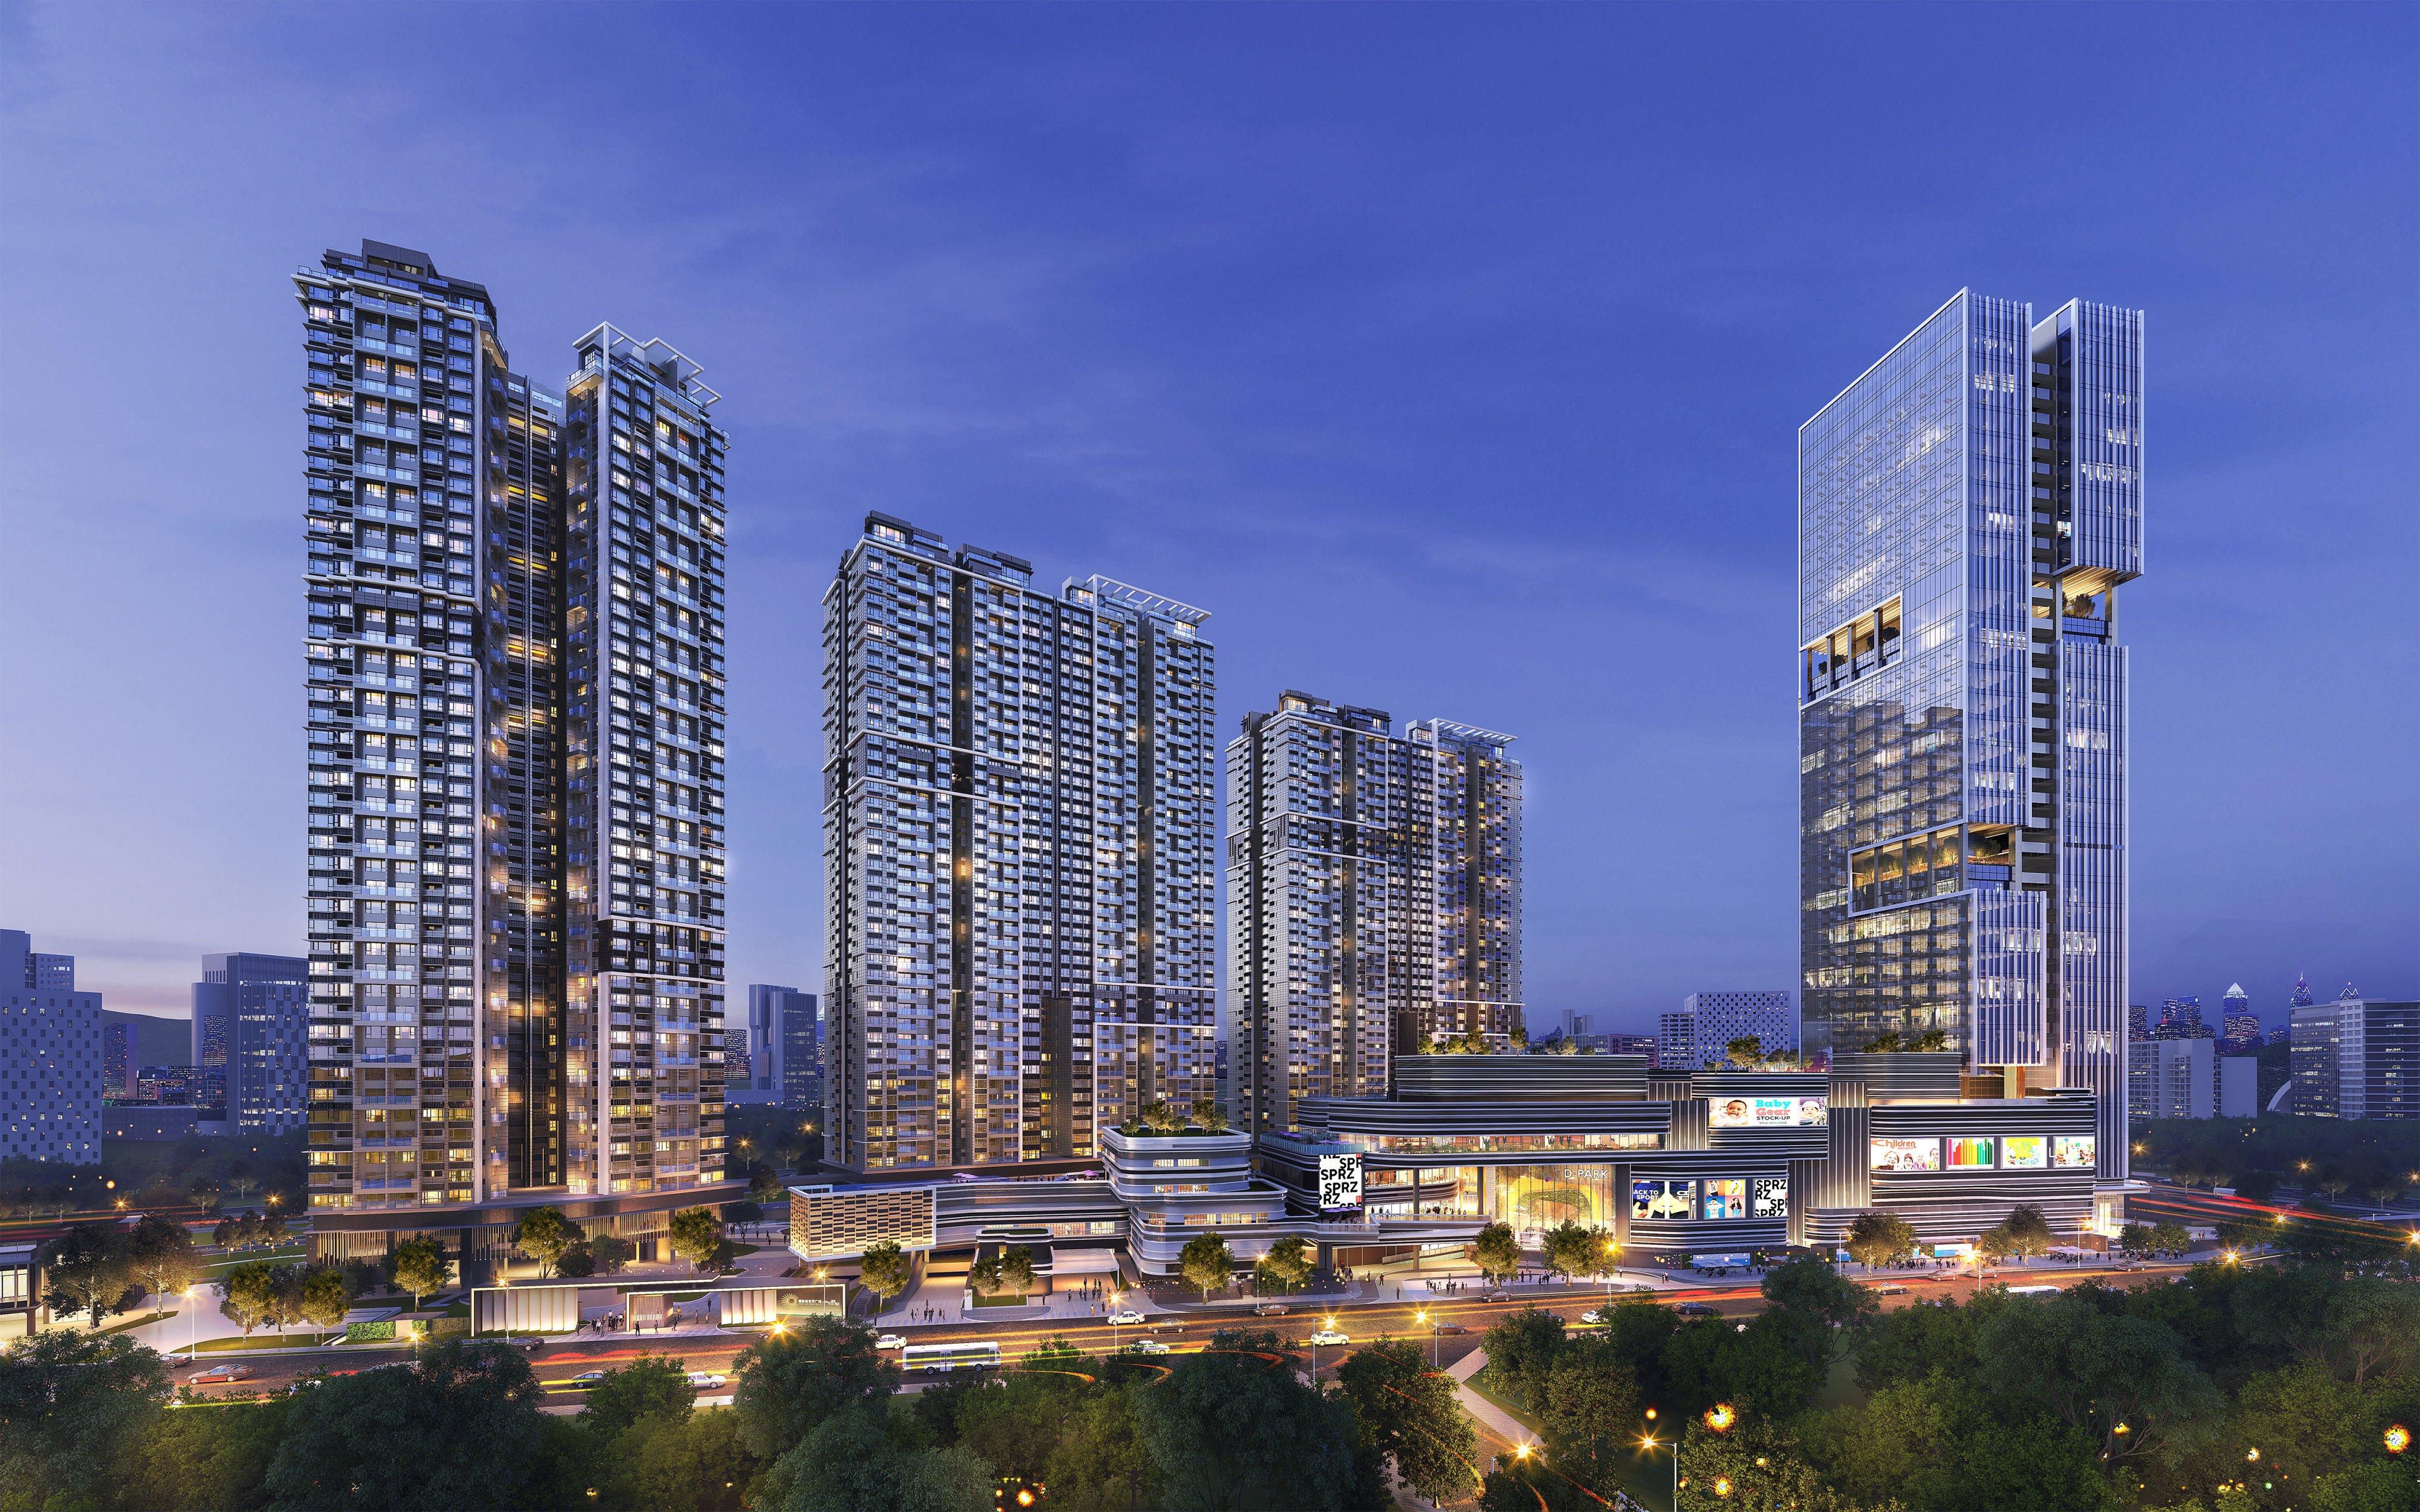 The New Metropolis Mansion is among projects that New World Development has launched this year in Guangzhou, and it is being developed in collaboration with Guangzhou Metro. Photo: Handout